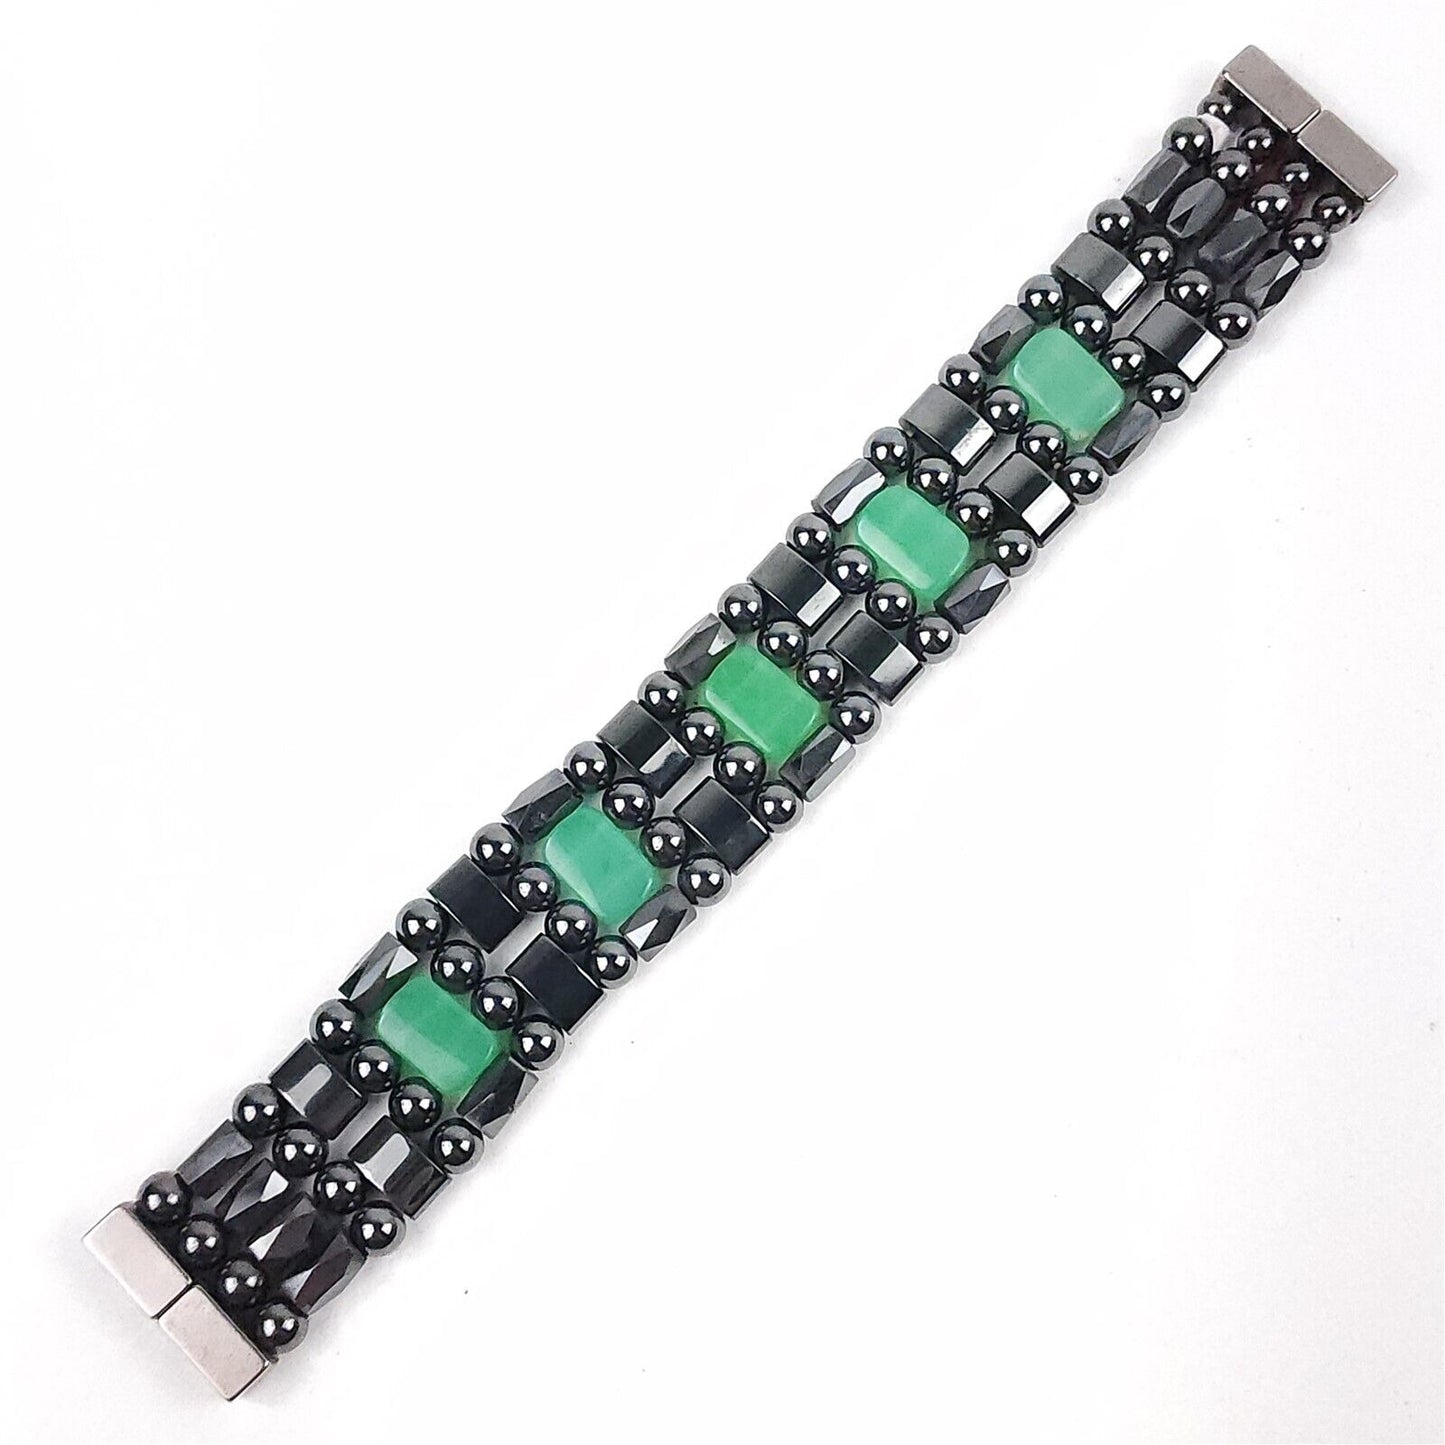 Black & Light Green Opaque Natural Stone Magnetic Bracelet Therapeutic Quad